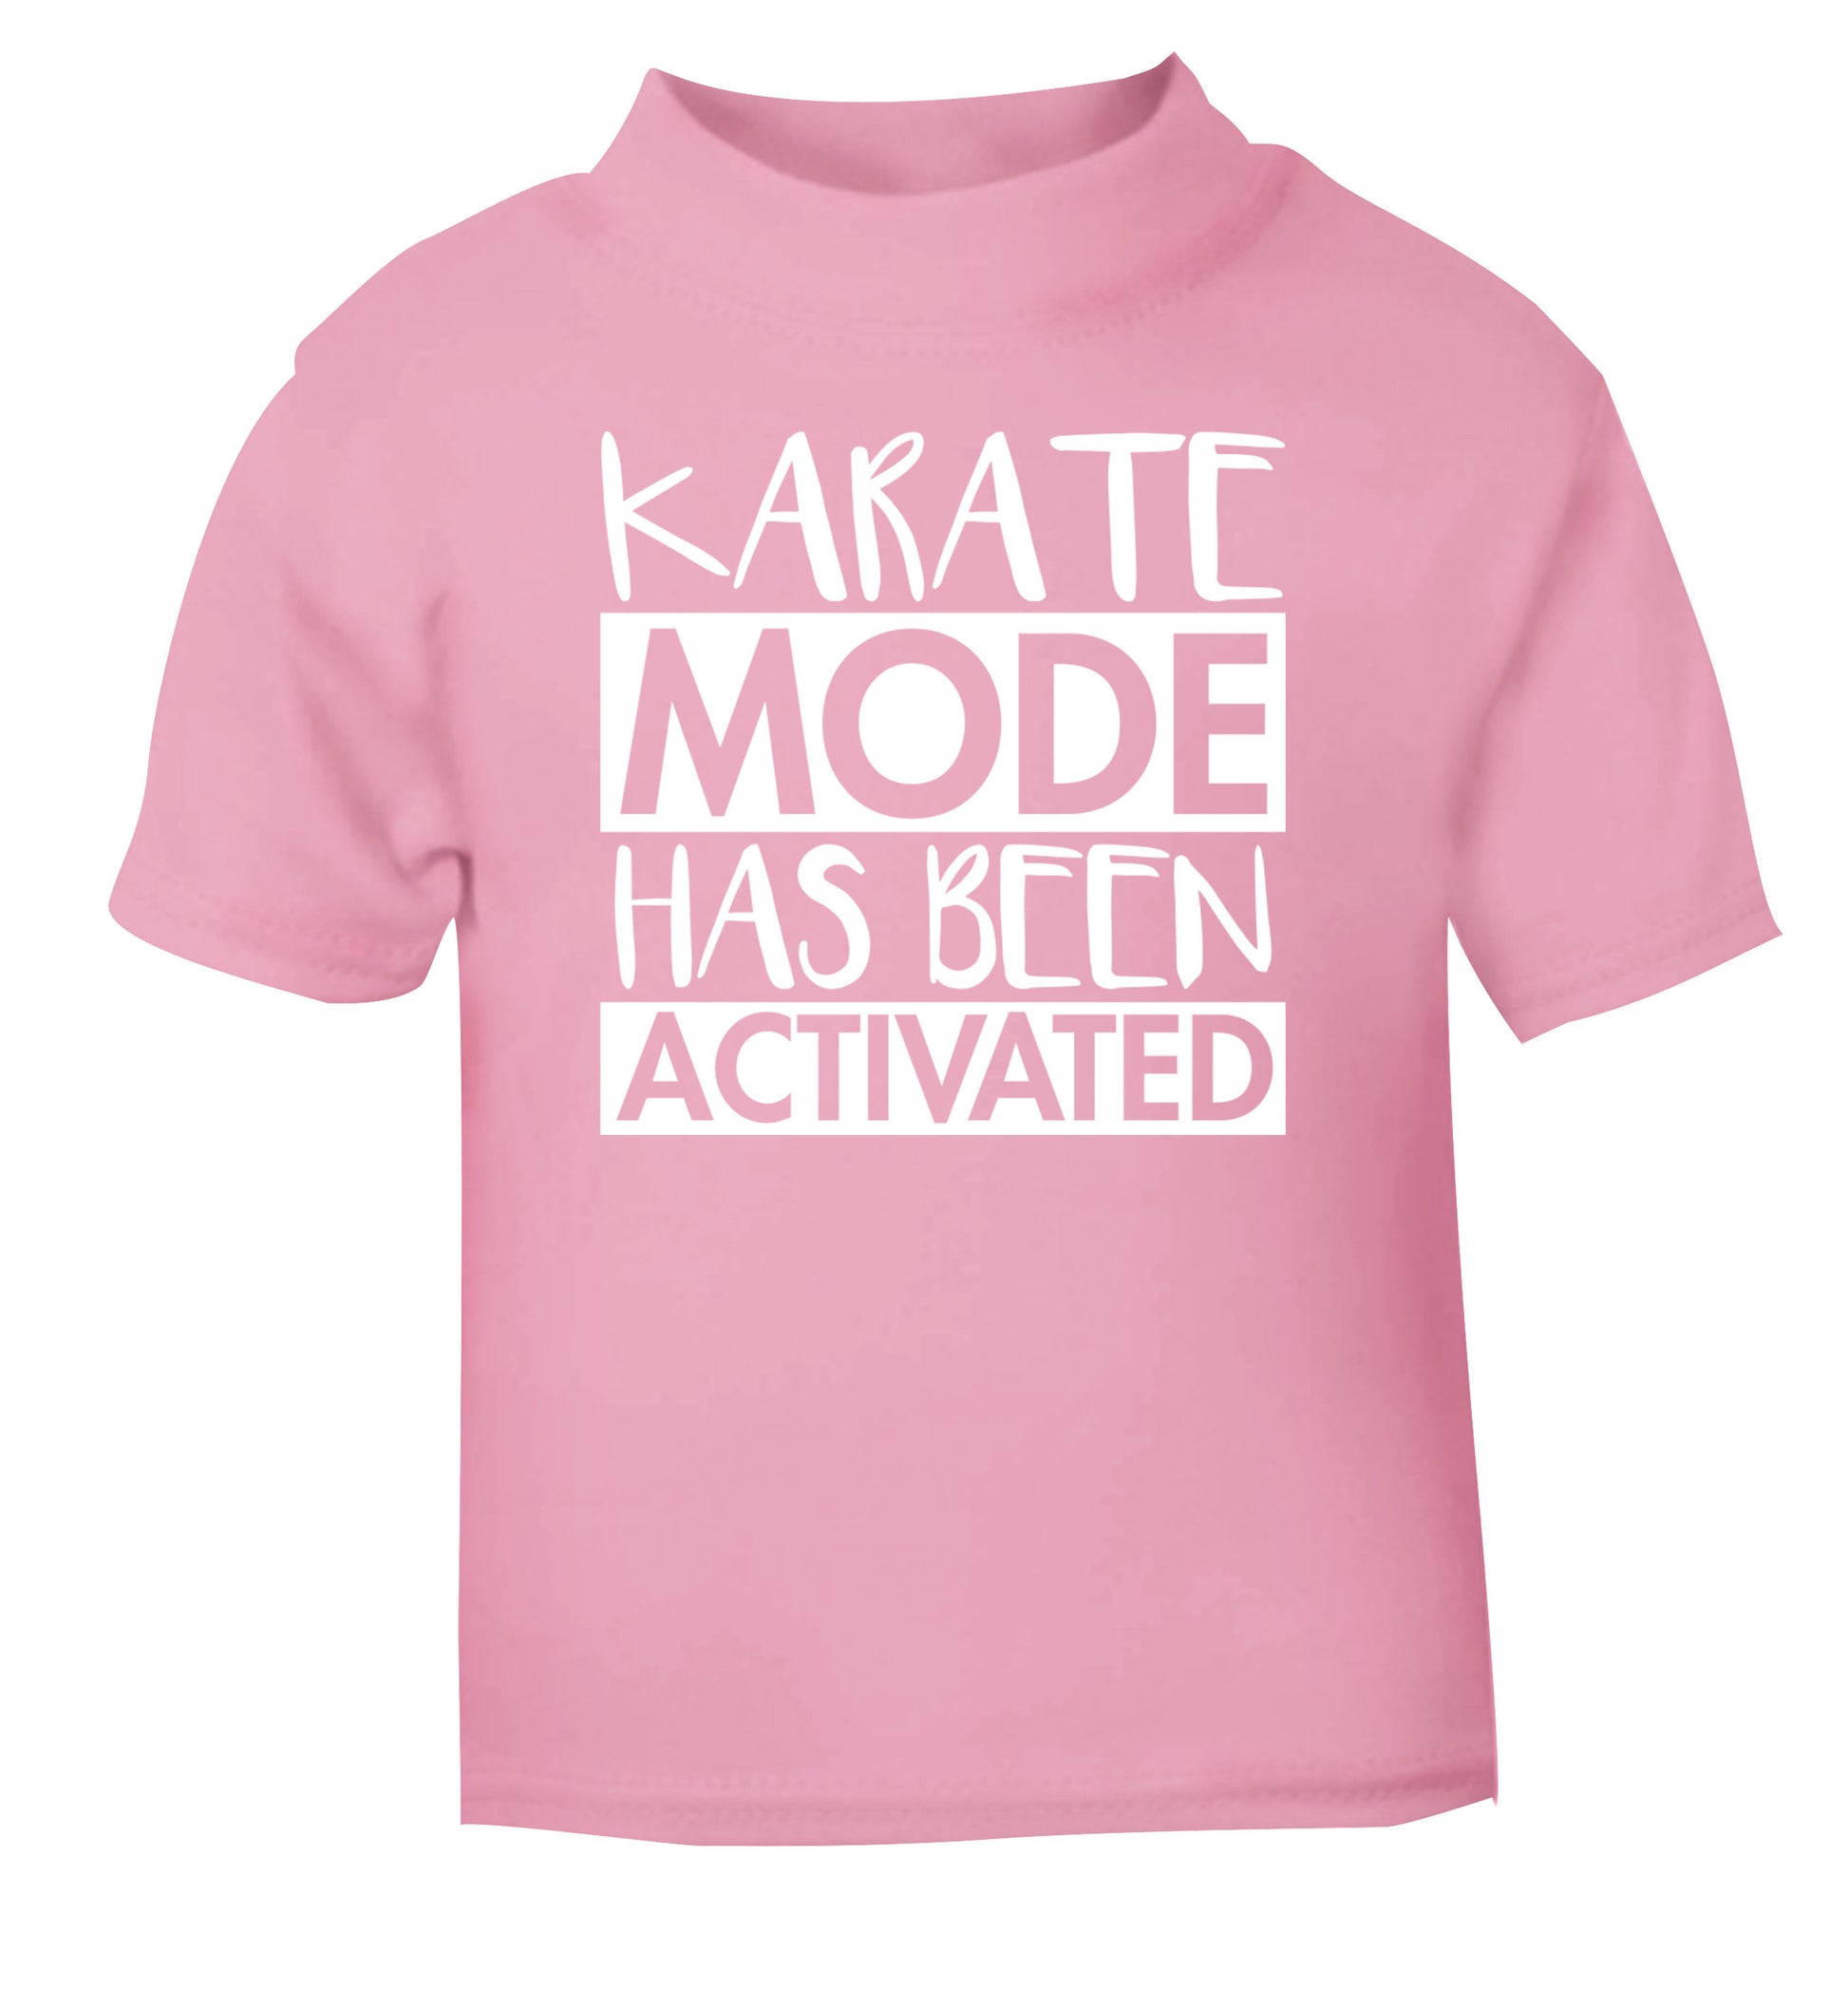 Karate mode activated light pink Baby Toddler Tshirt 2 Years